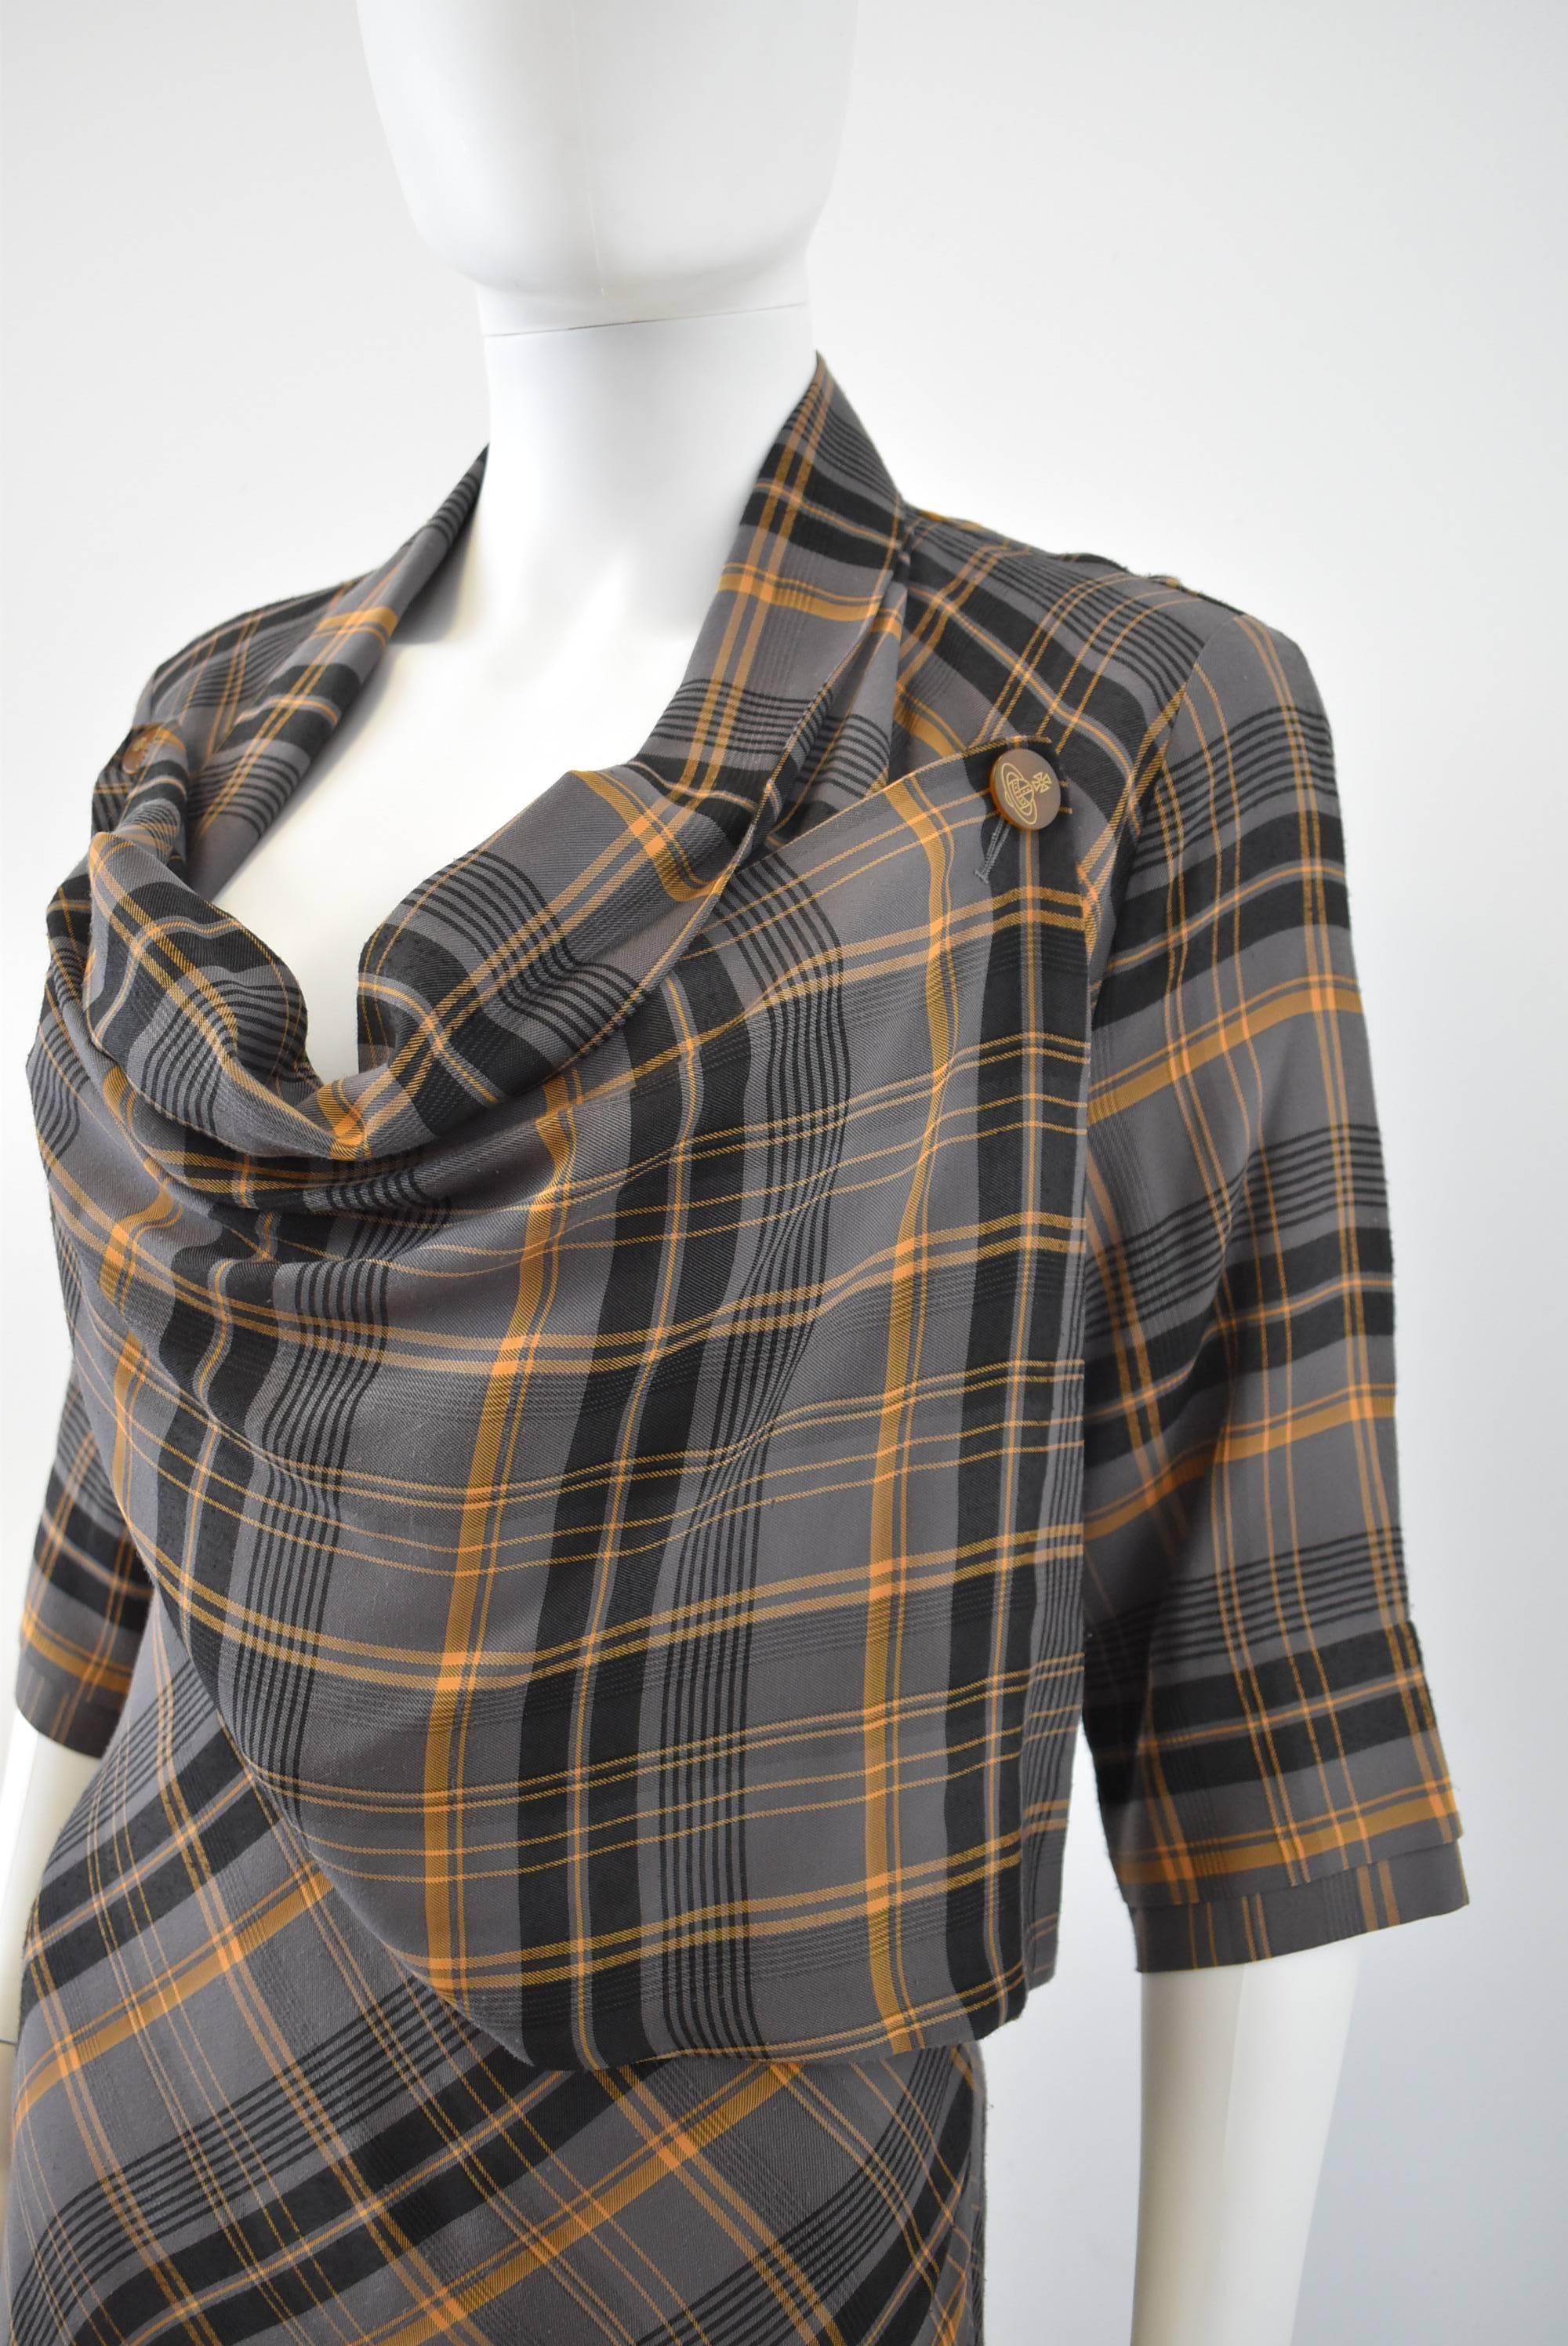 A grey tartan check dress from Vivienne Westwood’s diffusion line Red Label. The dress has a simple shape that skims the waist and flares out at the skirt. The dress has a cowl neckline that is created by two bib panels that crossover and button at